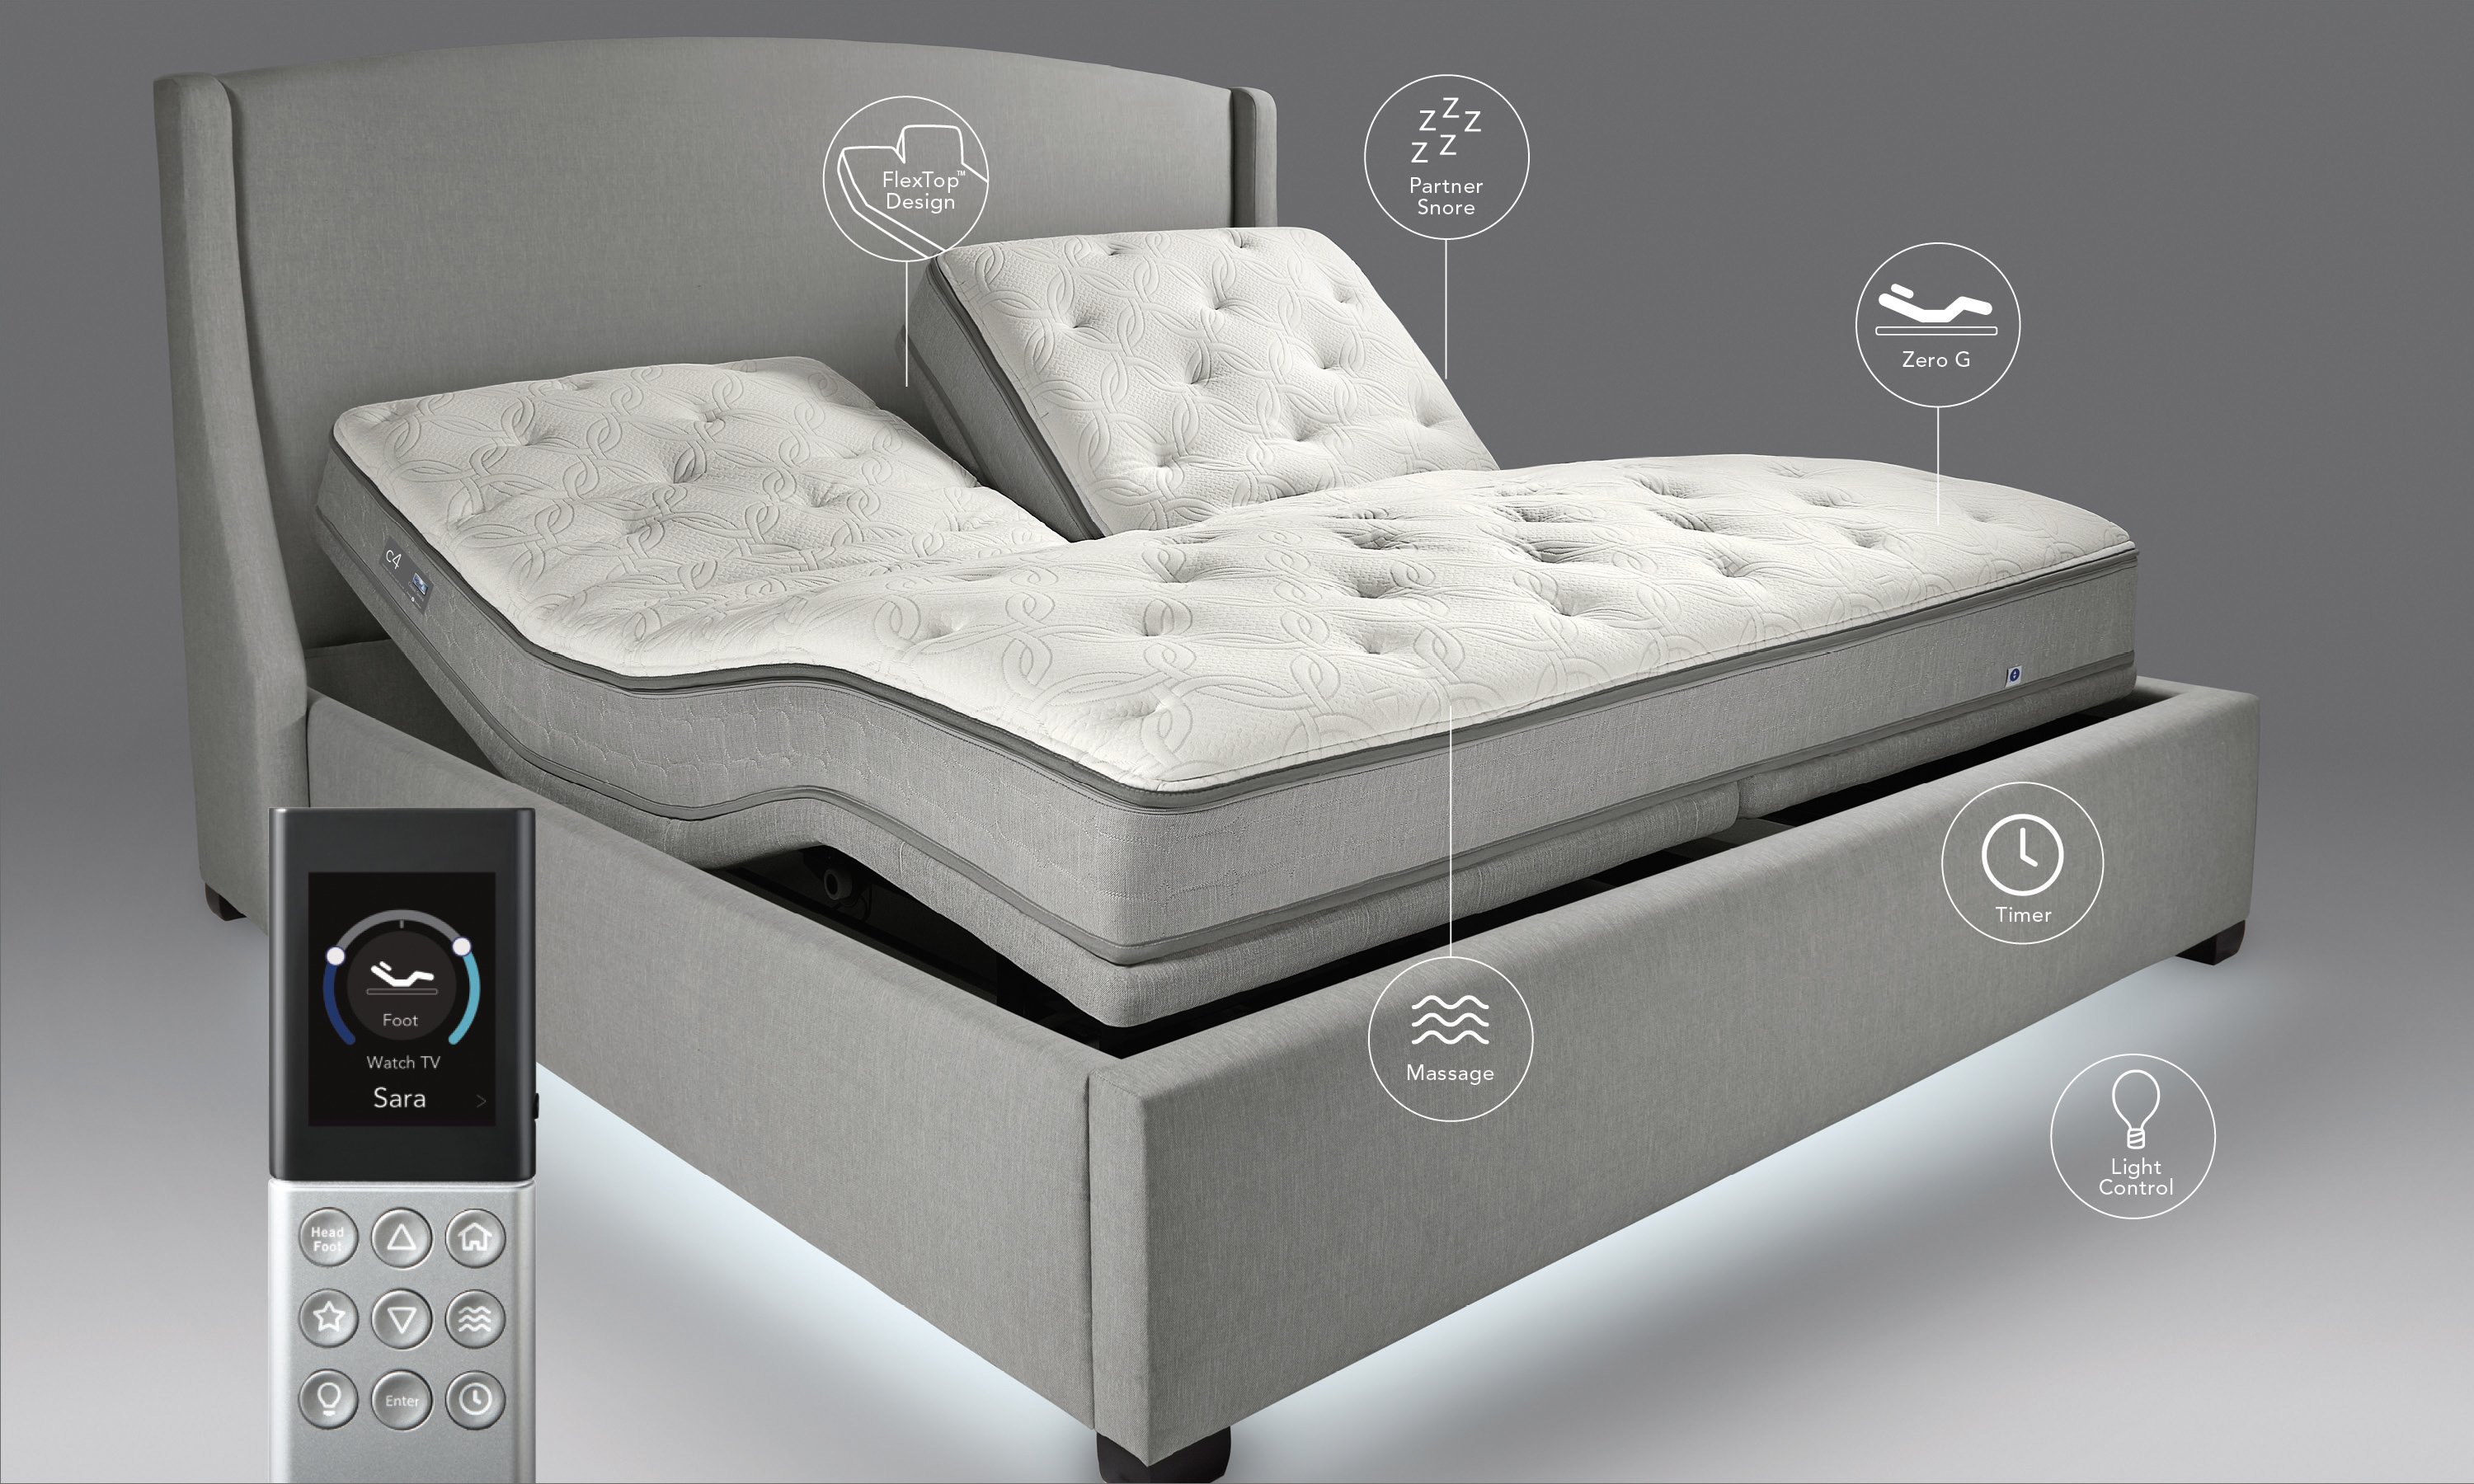 The Sleep Number bed offers the "dreamiest" sleep technology